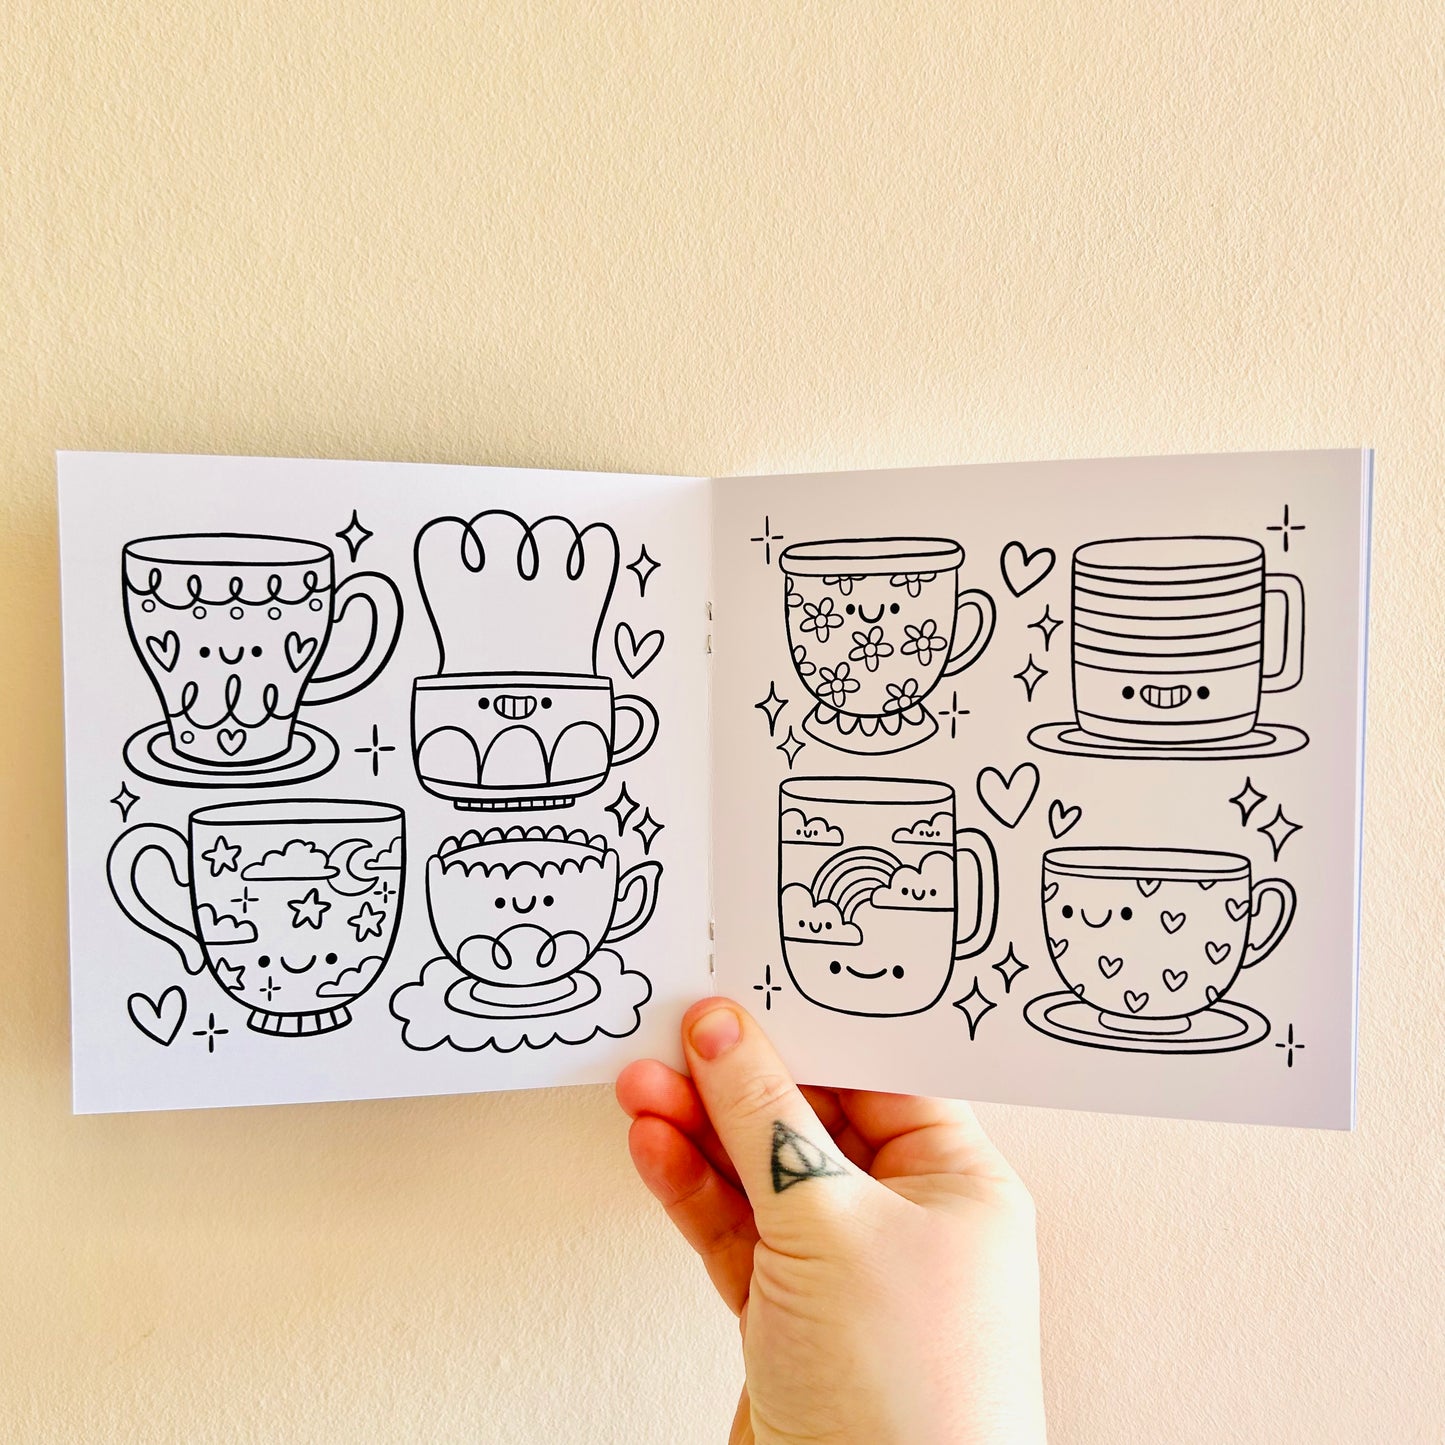 Tea & Biscuits Colouring Book